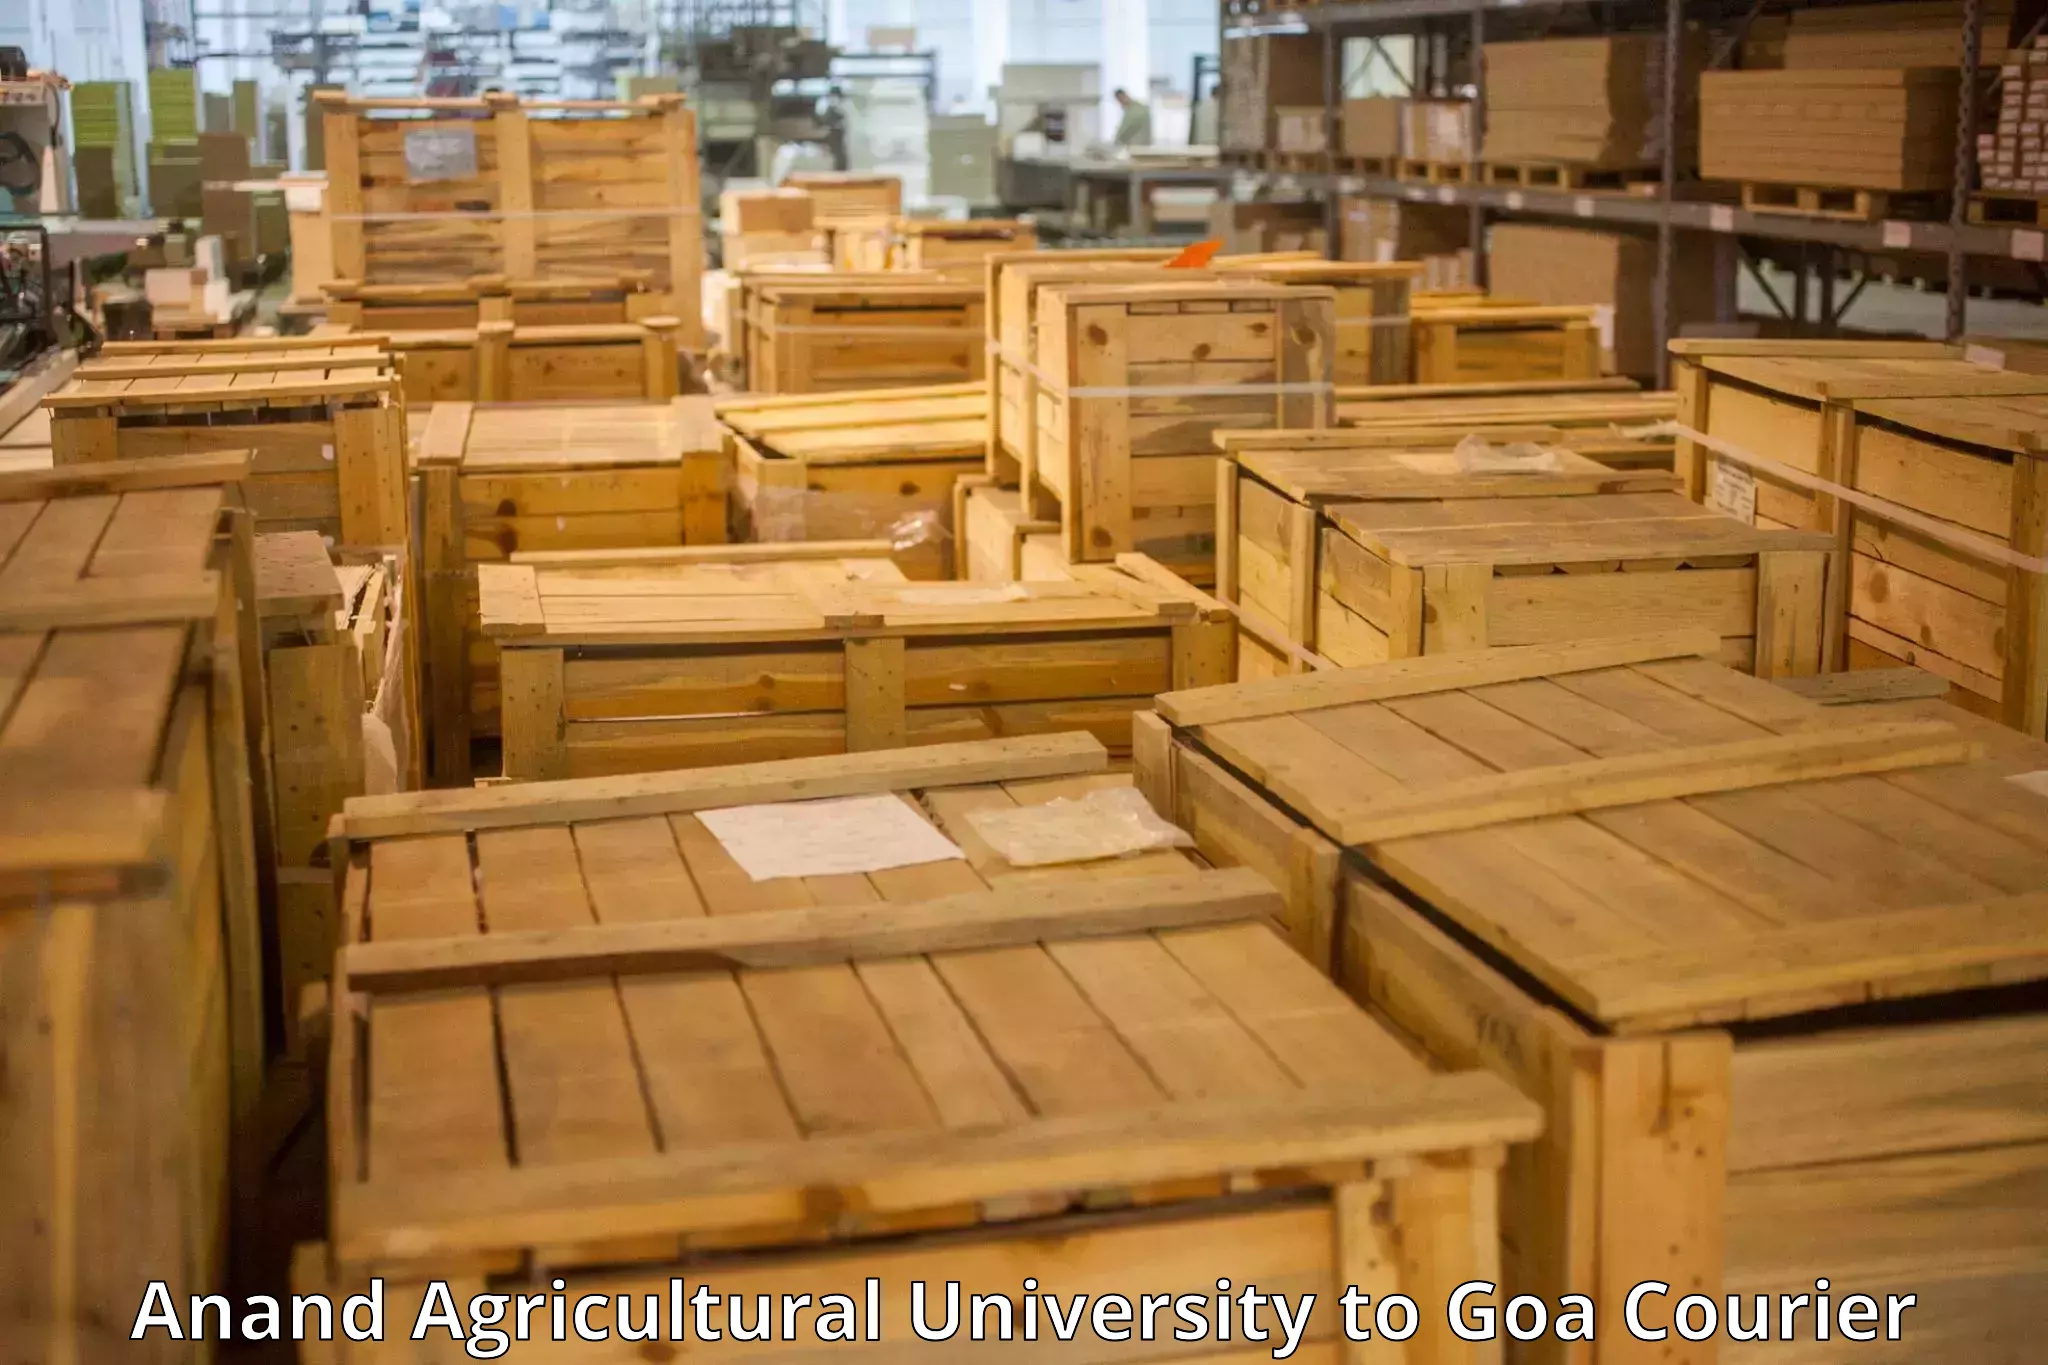 Timely baggage transport Anand Agricultural University to IIT Goa